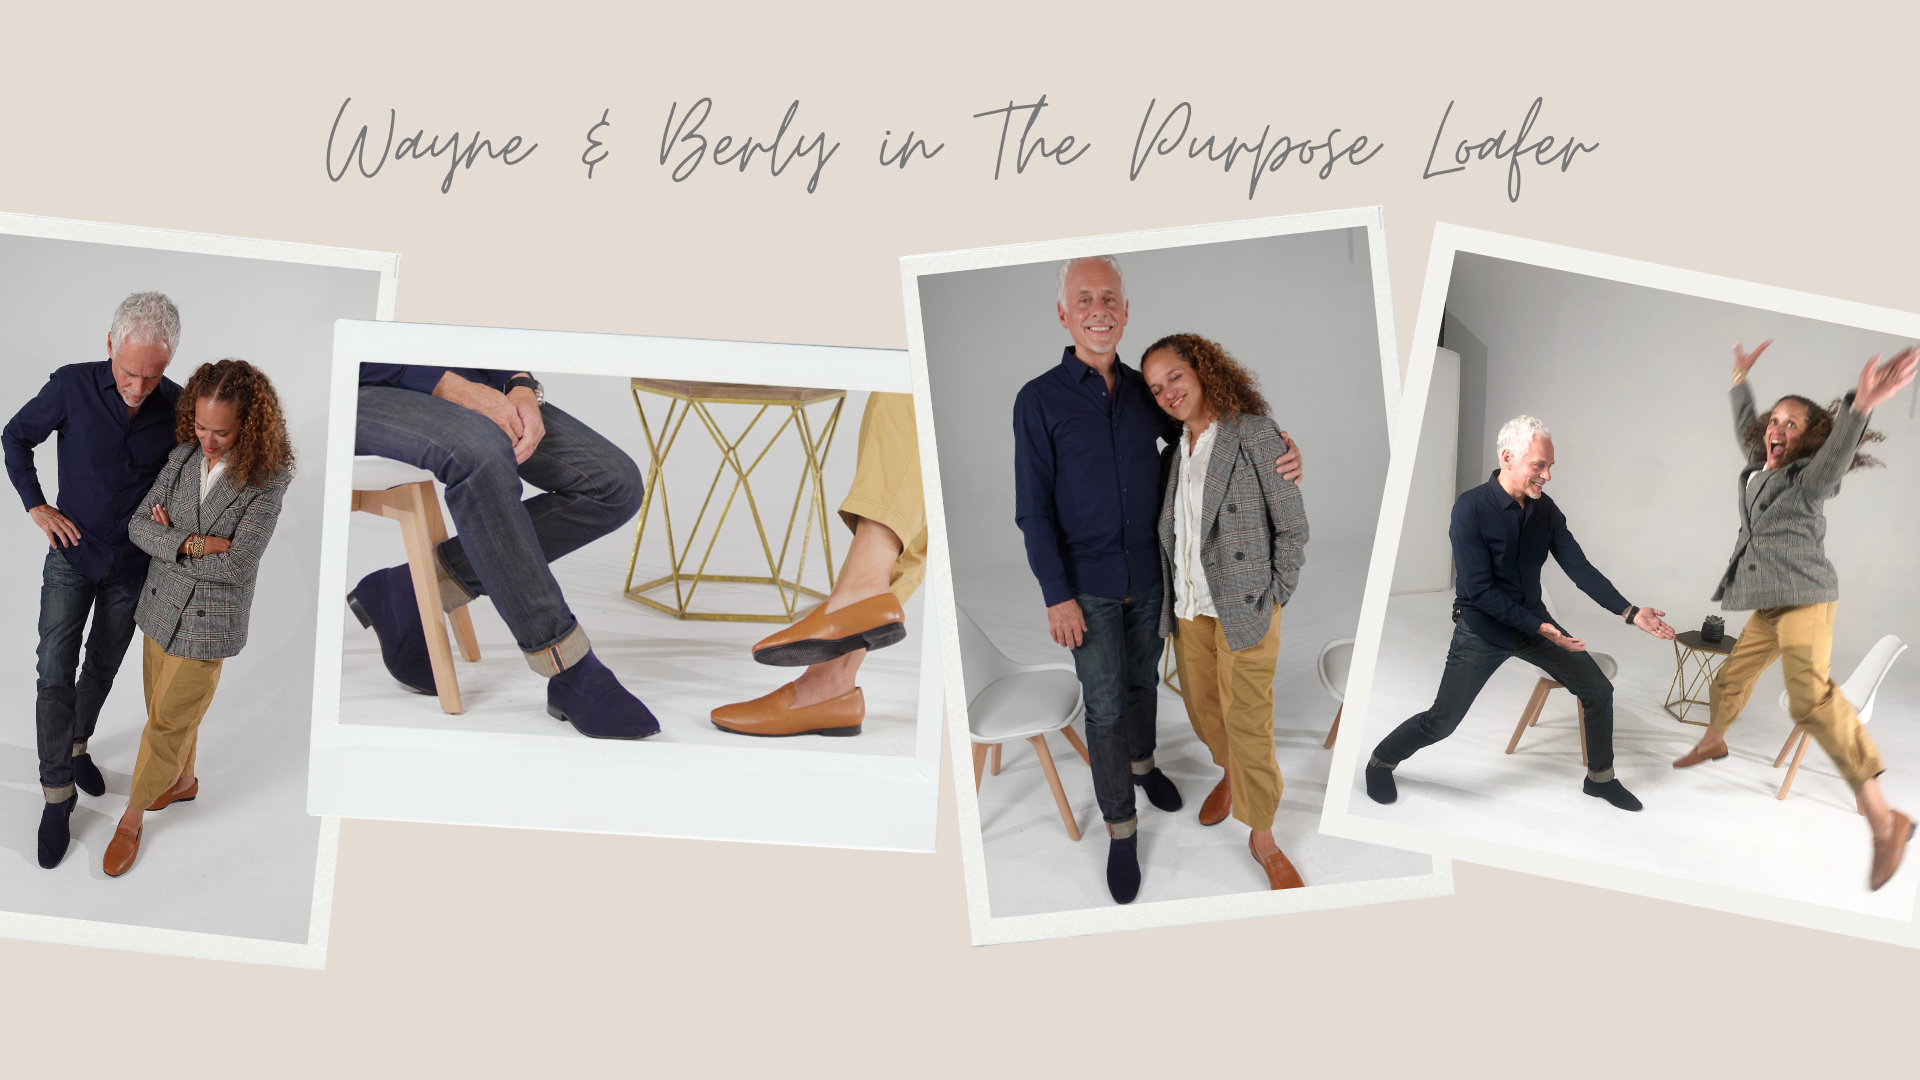 Berly and Wayne Isaak in the RĒDEN Purpose Loafer